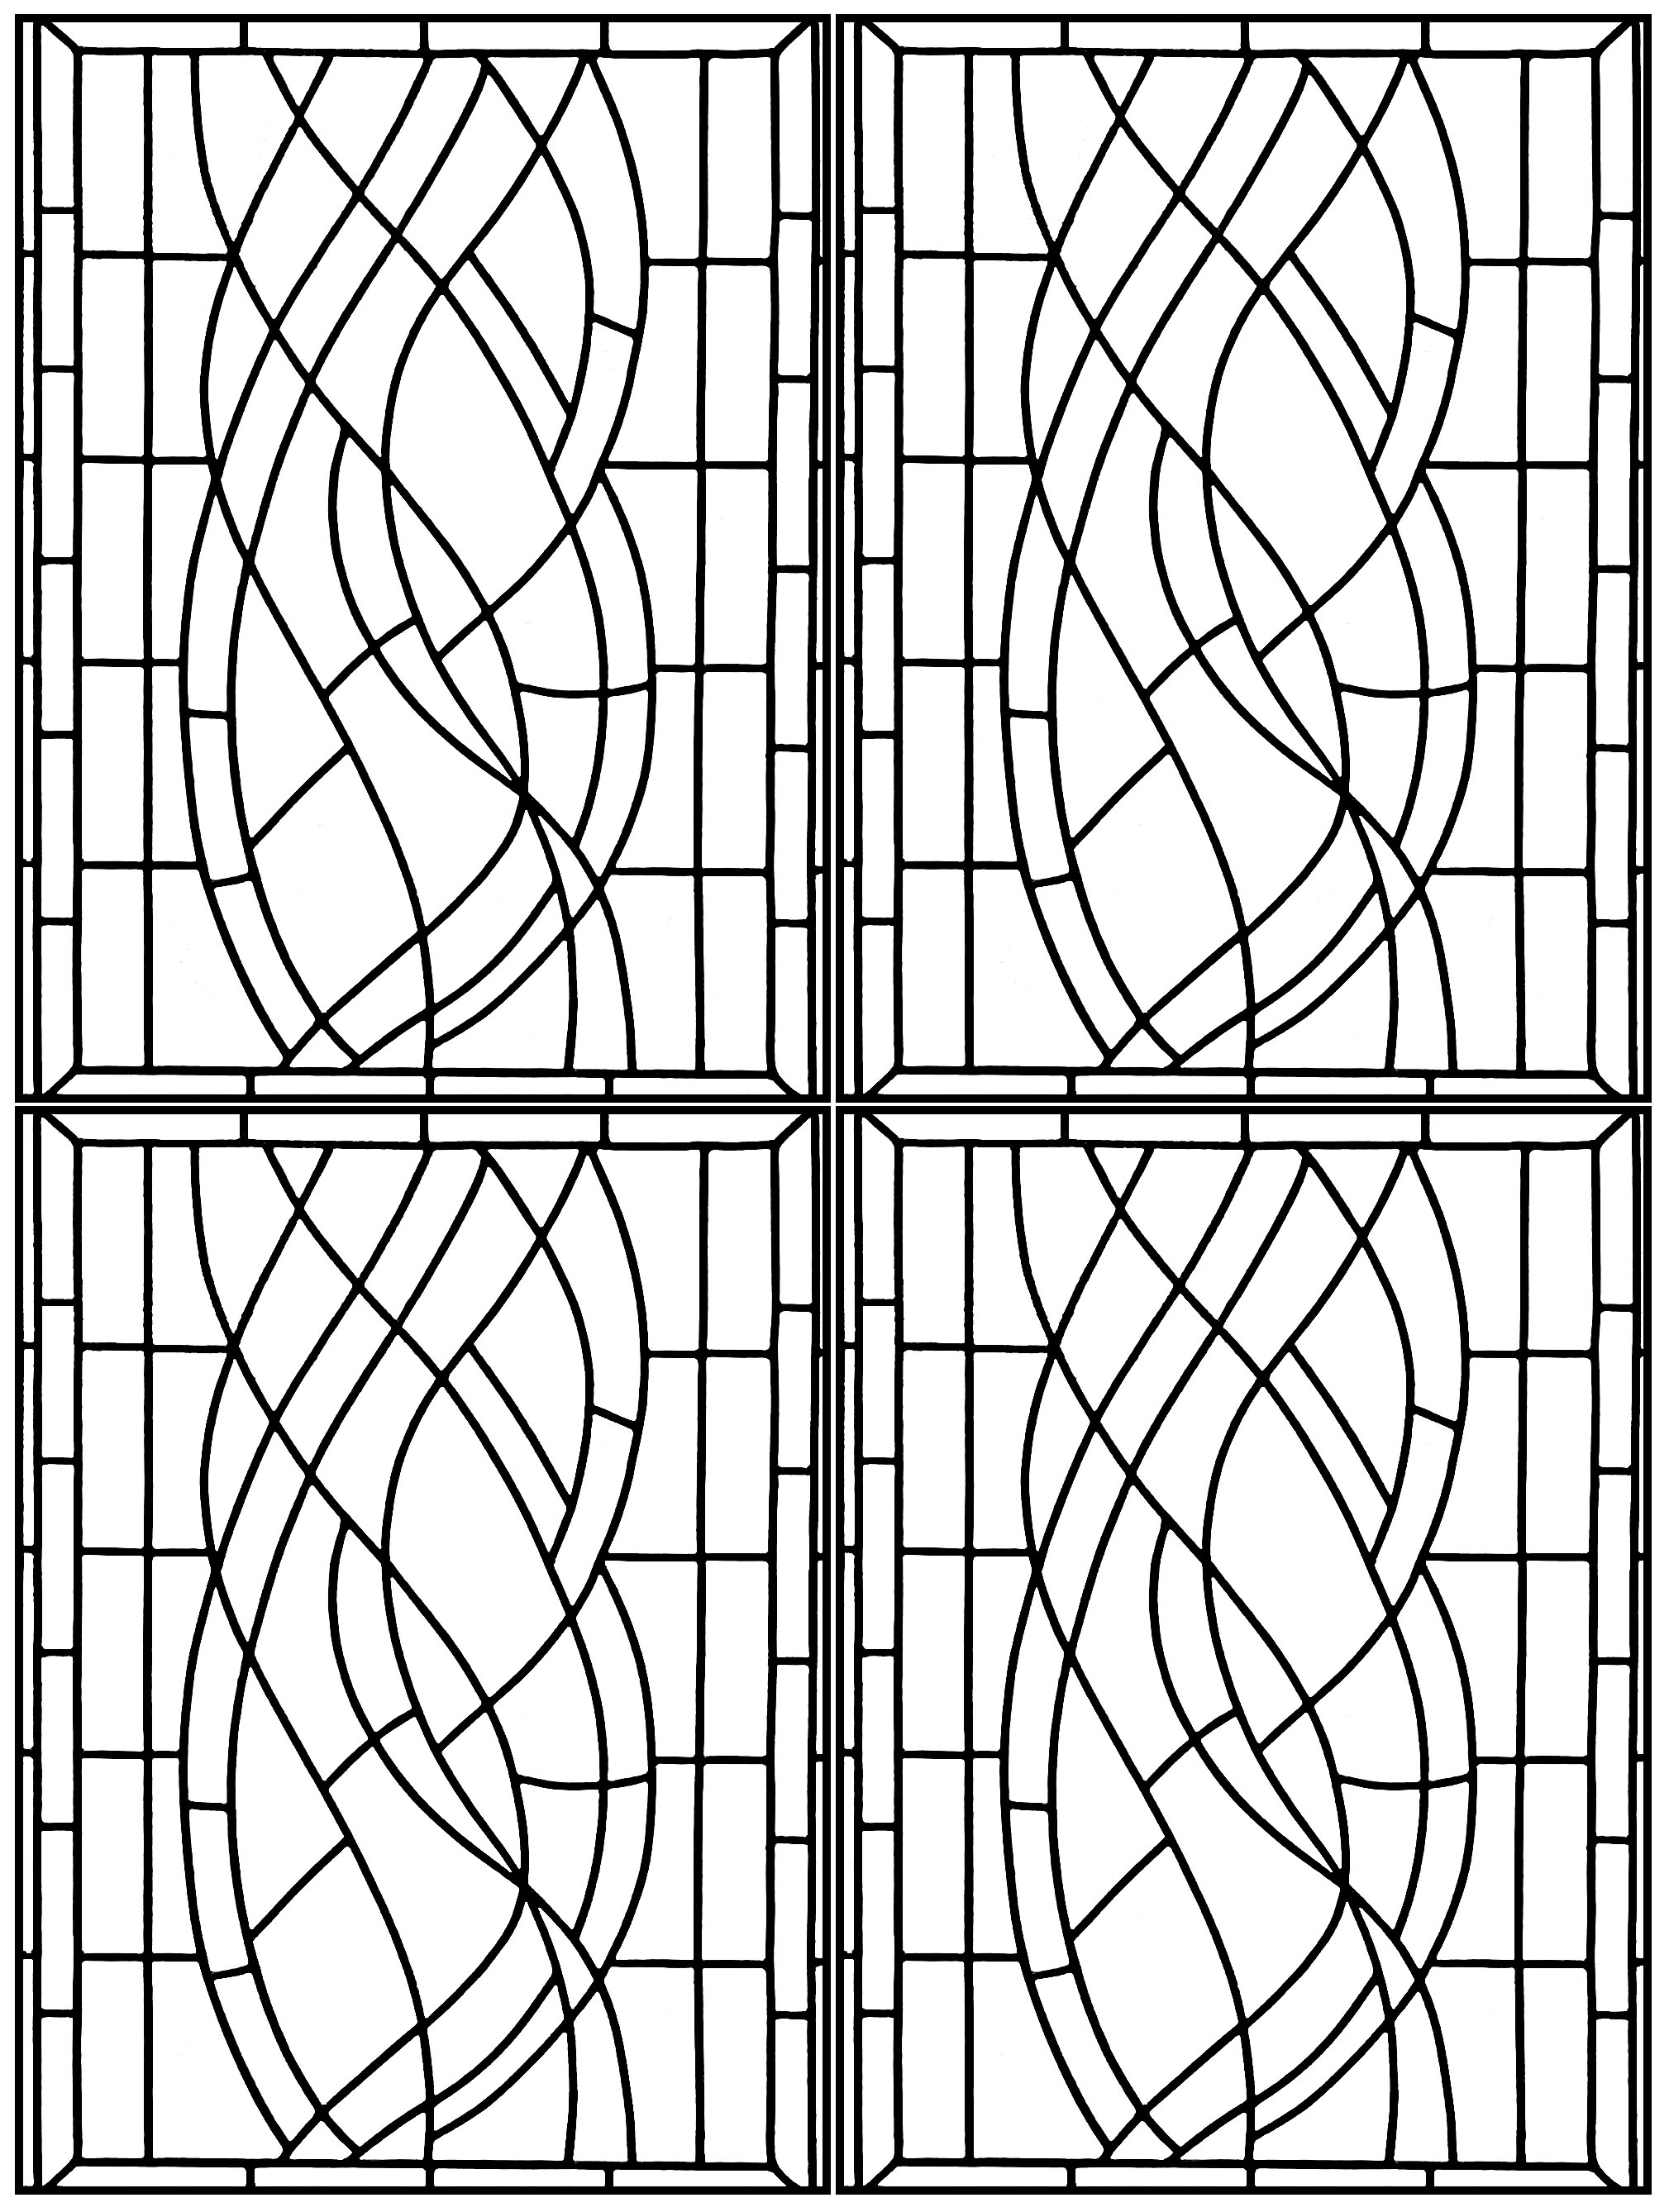 Coloring created from a Art Deco Stained glass spotted in a hotel in Madrid (very complex version)